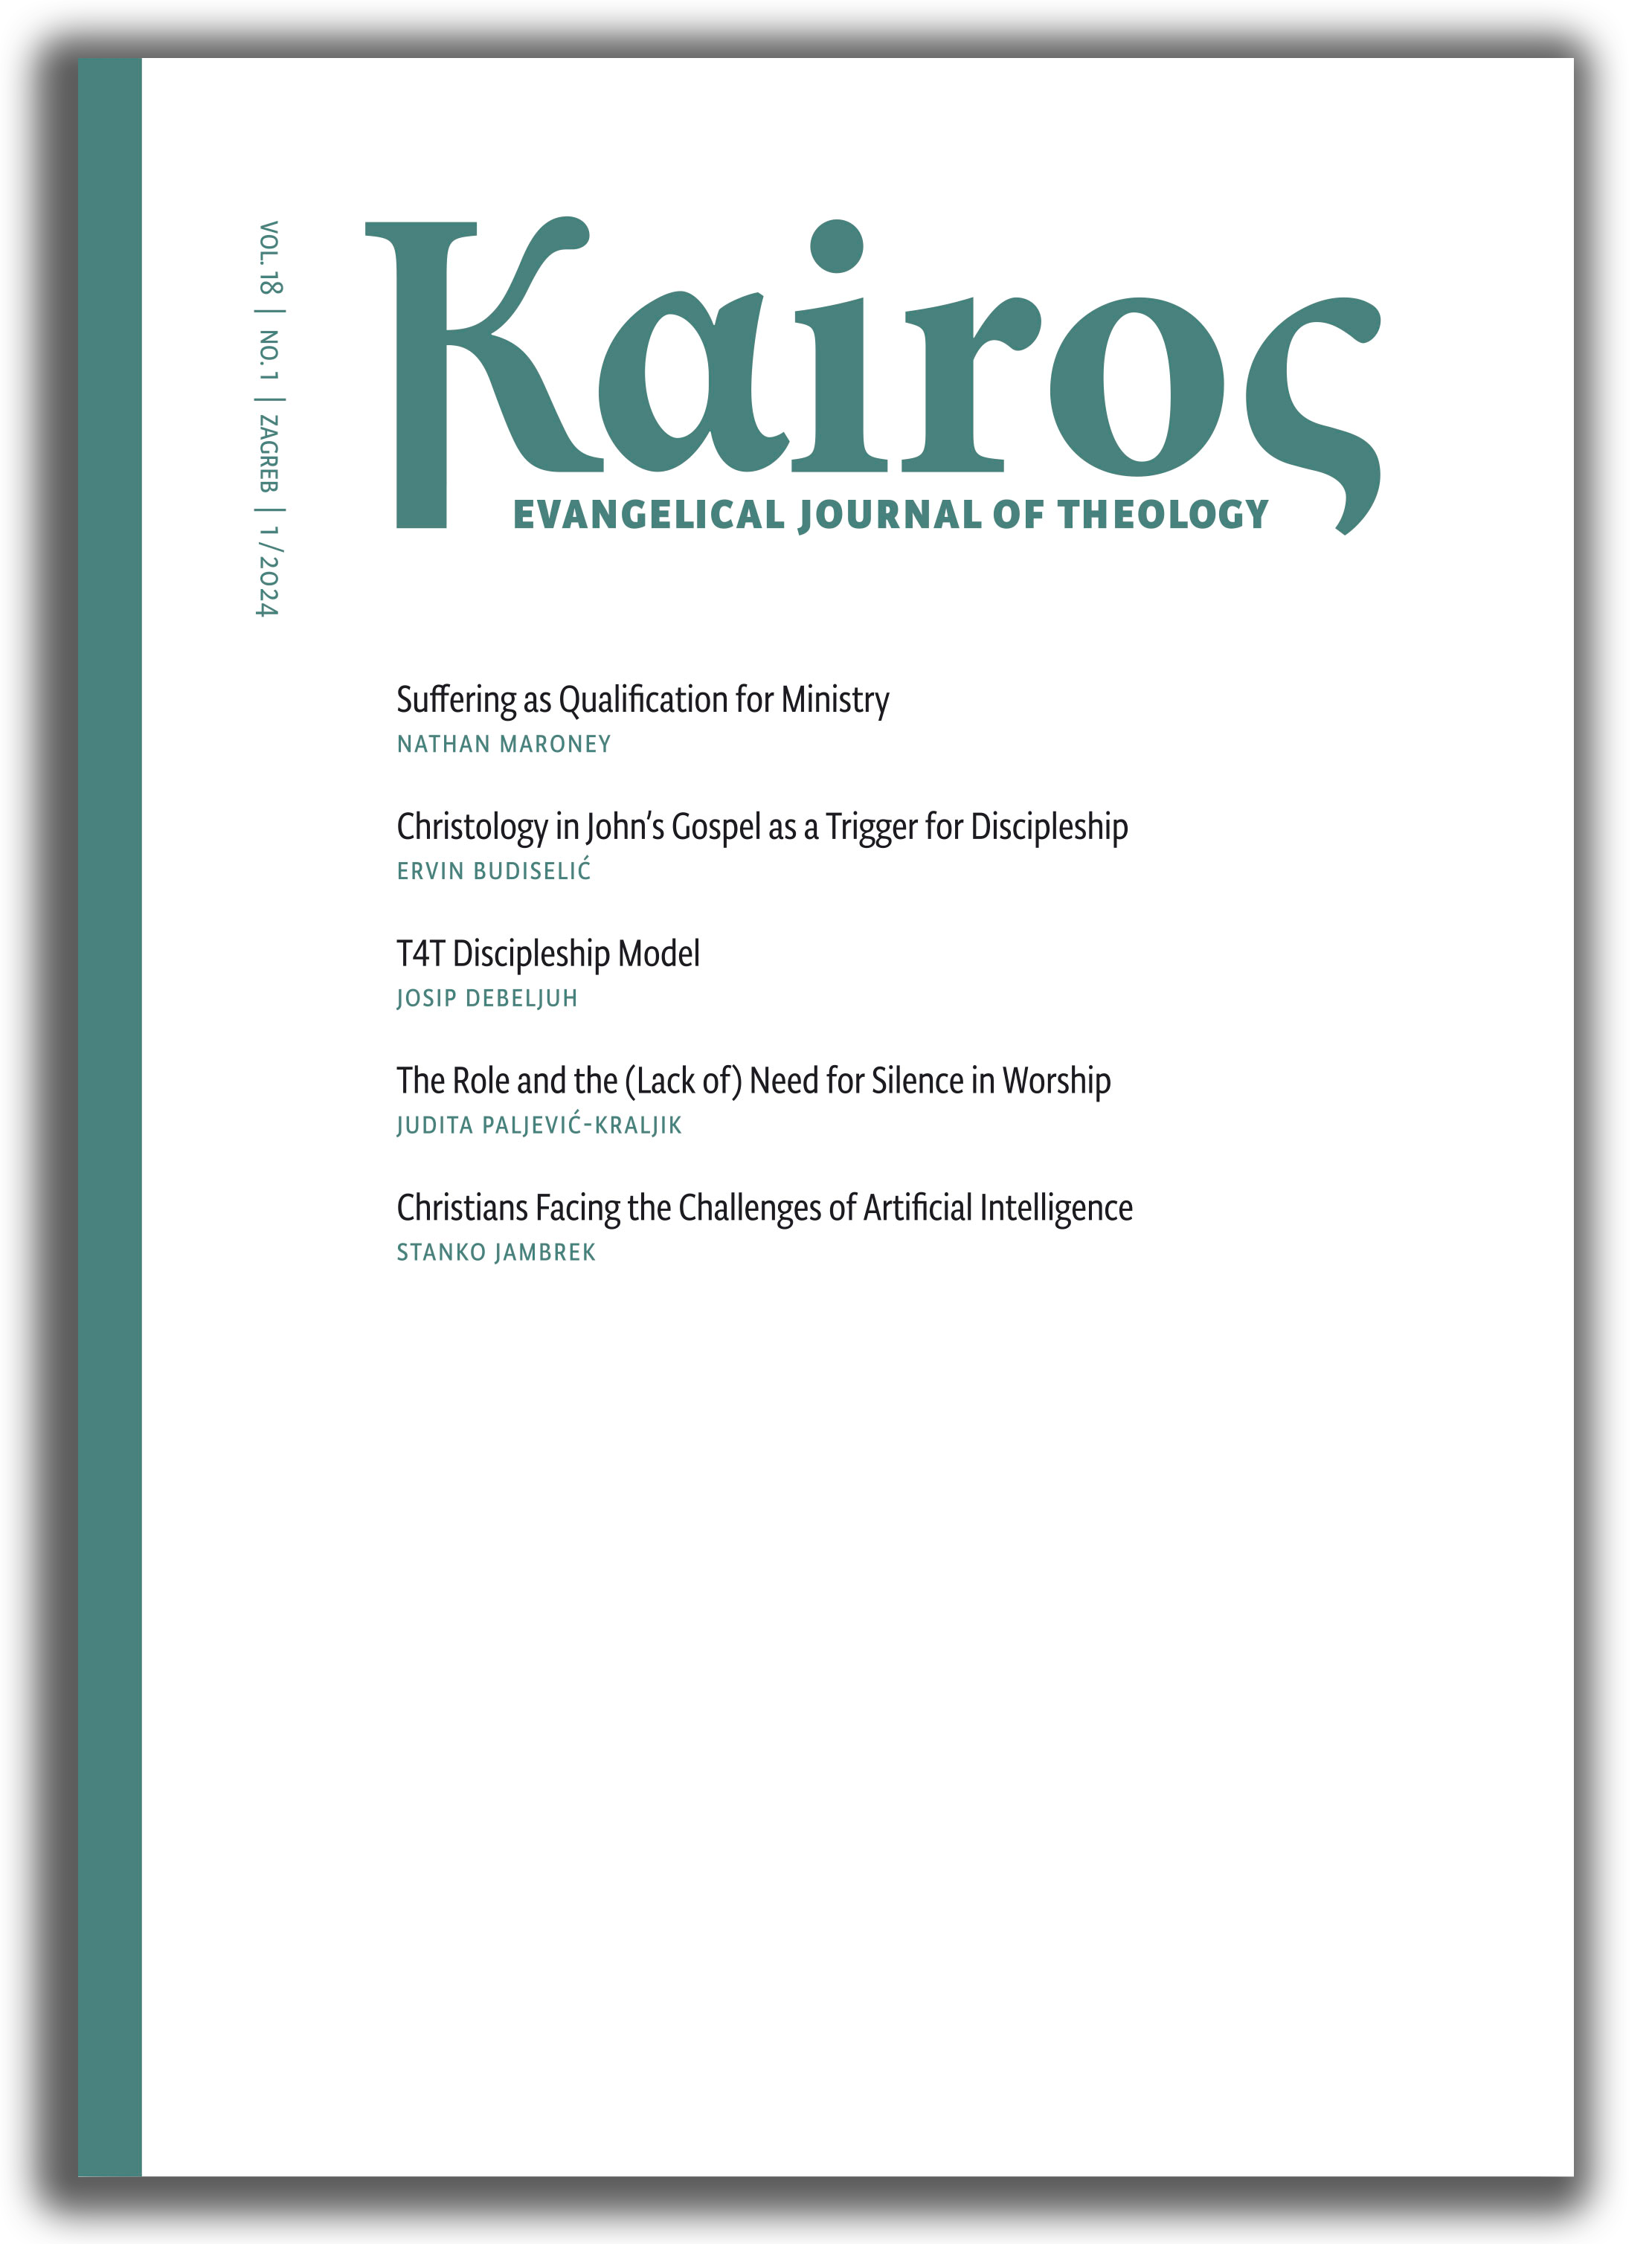 Kairos: Evangelical Journal of Theology Cover page